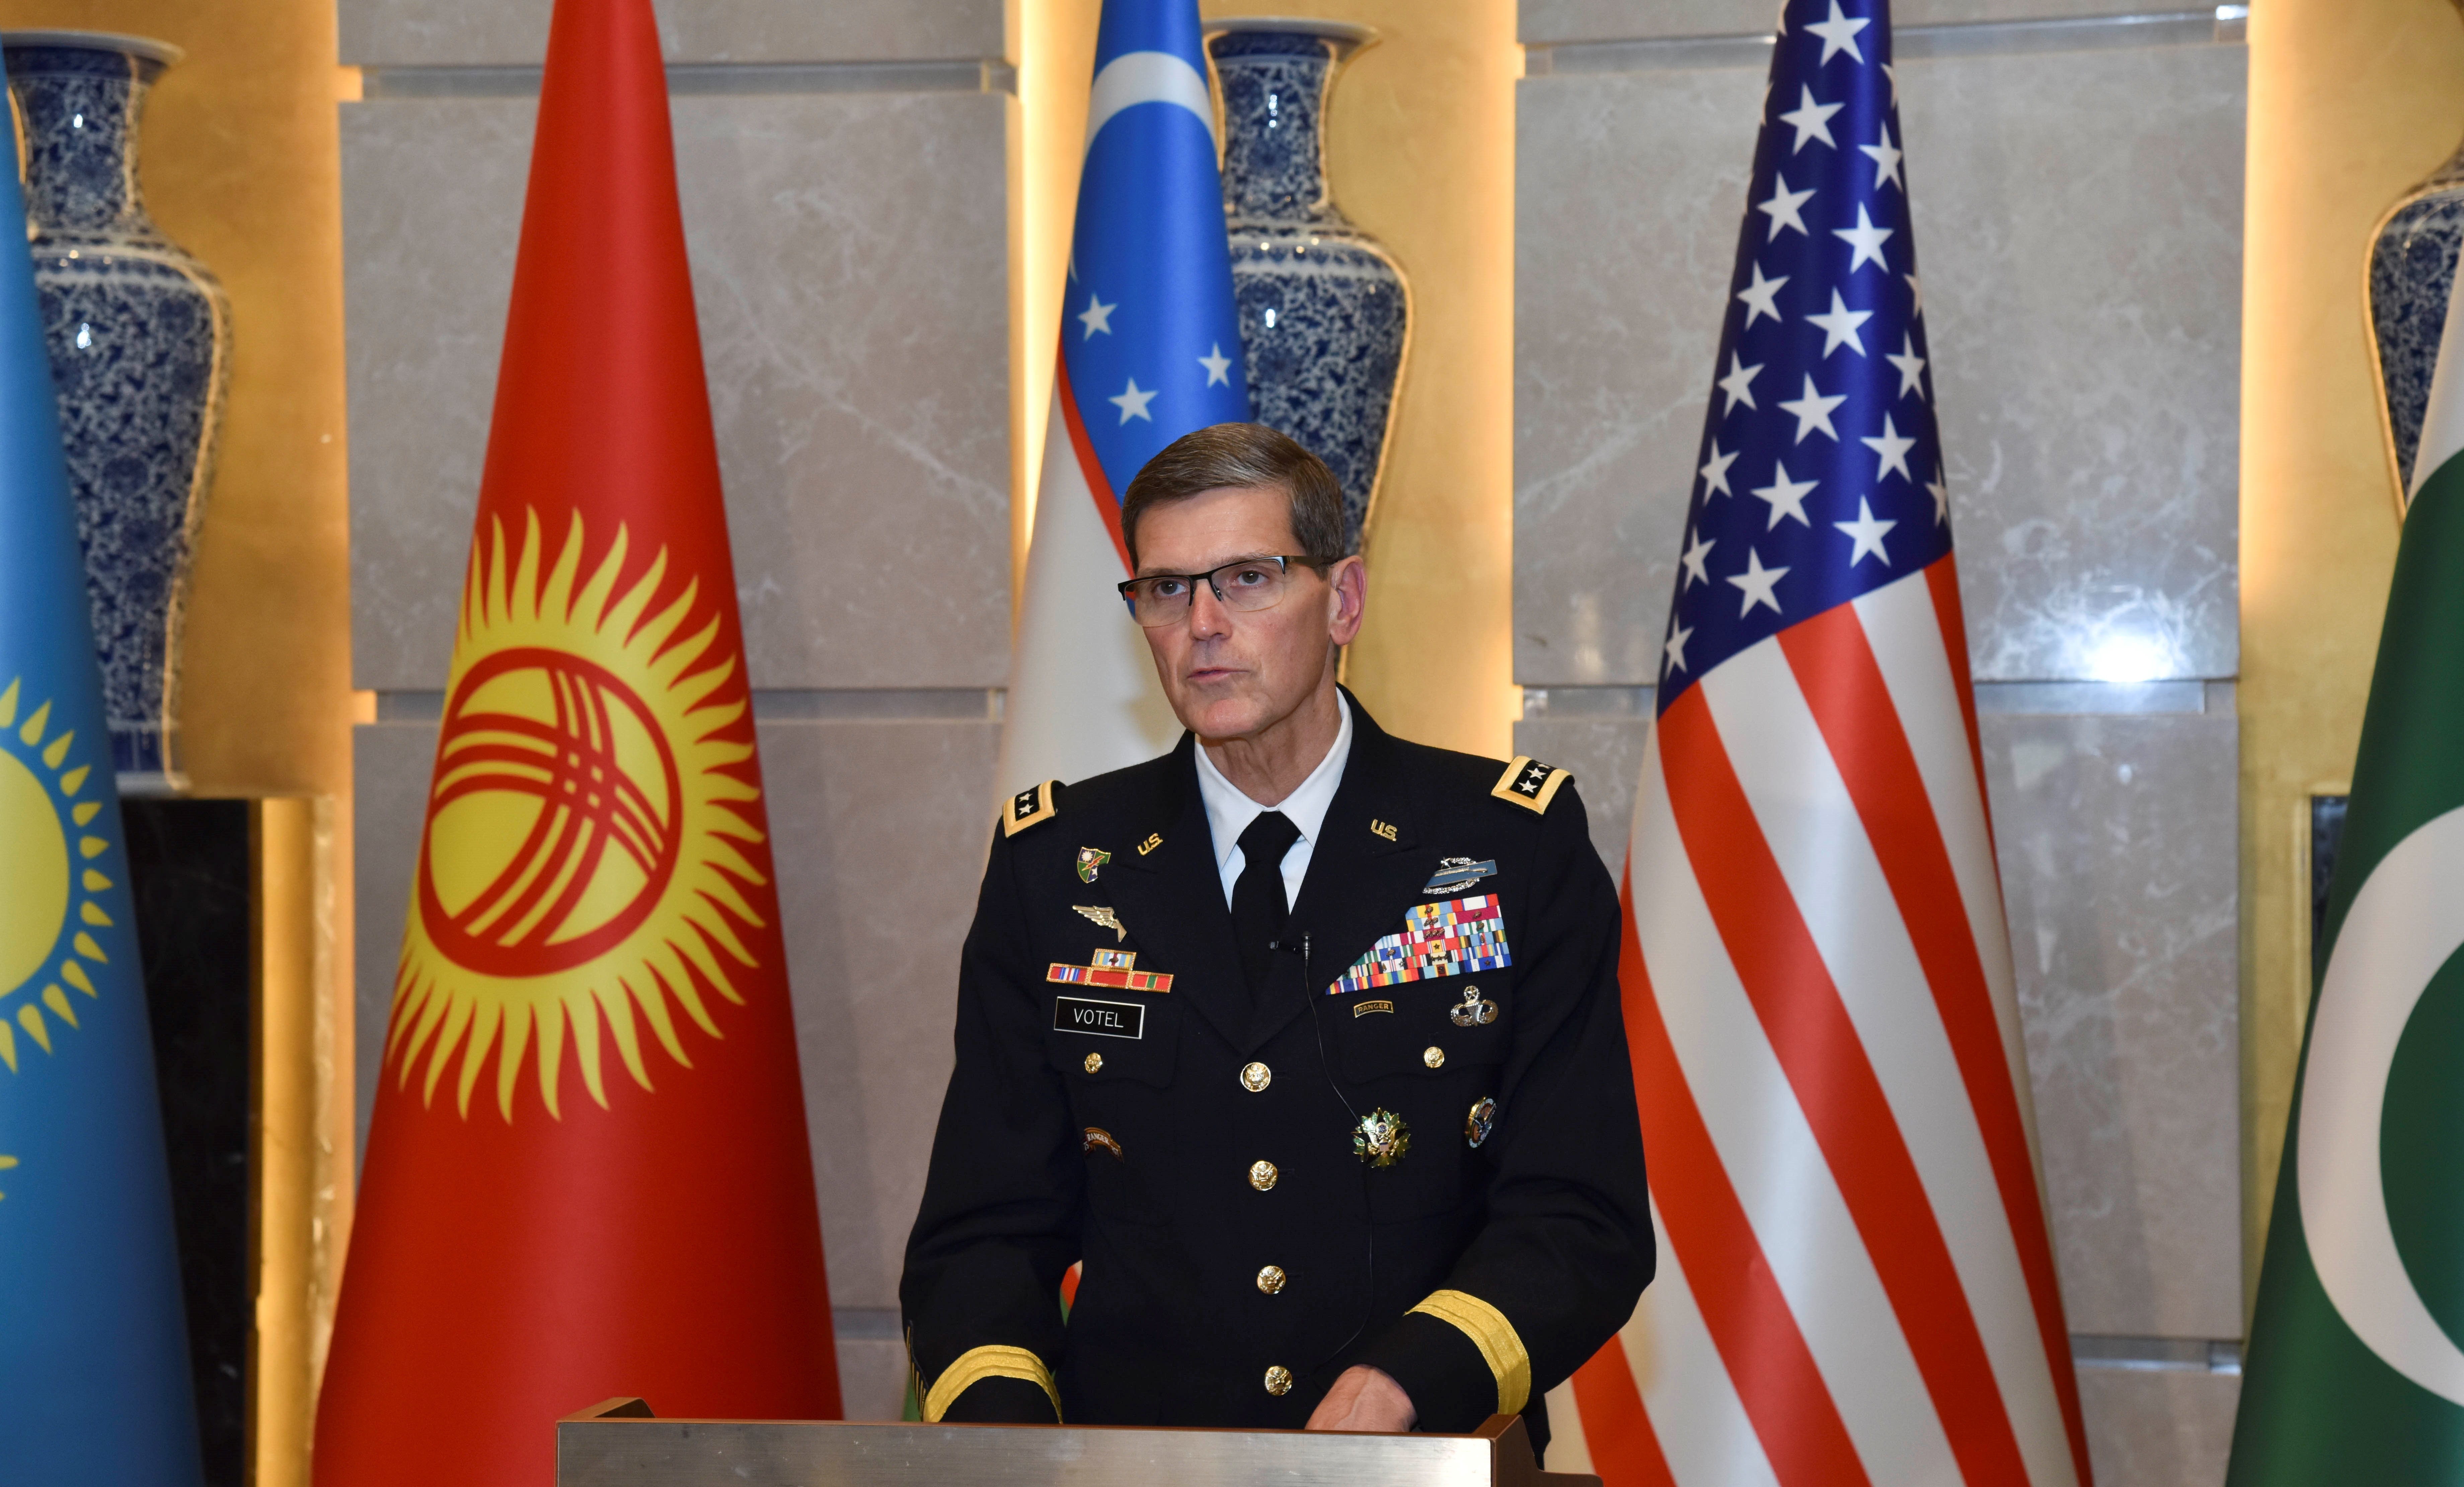 Statement from Gen. Joseph Votel, Commander, U.S. Central Command, on the completion of the Central and South Asia Chiefs of Defense Conference, Tashkent, Uzbekistan > U.S. Central Command > Statements View